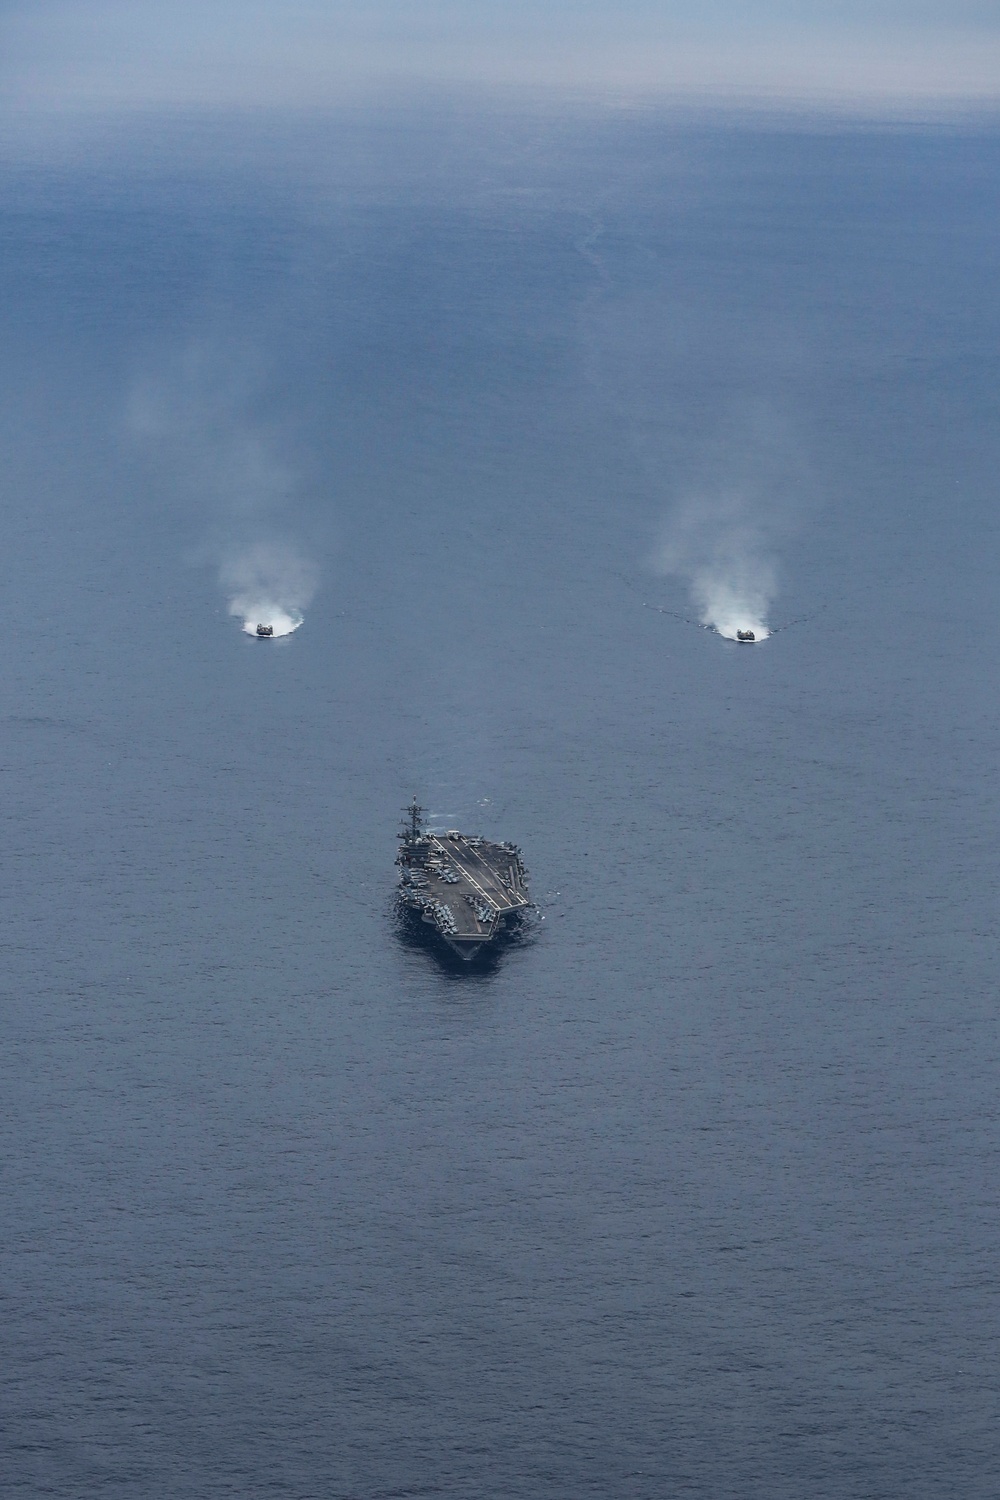 Abraham Lincoln sails in formation during exercise Noble Fusion